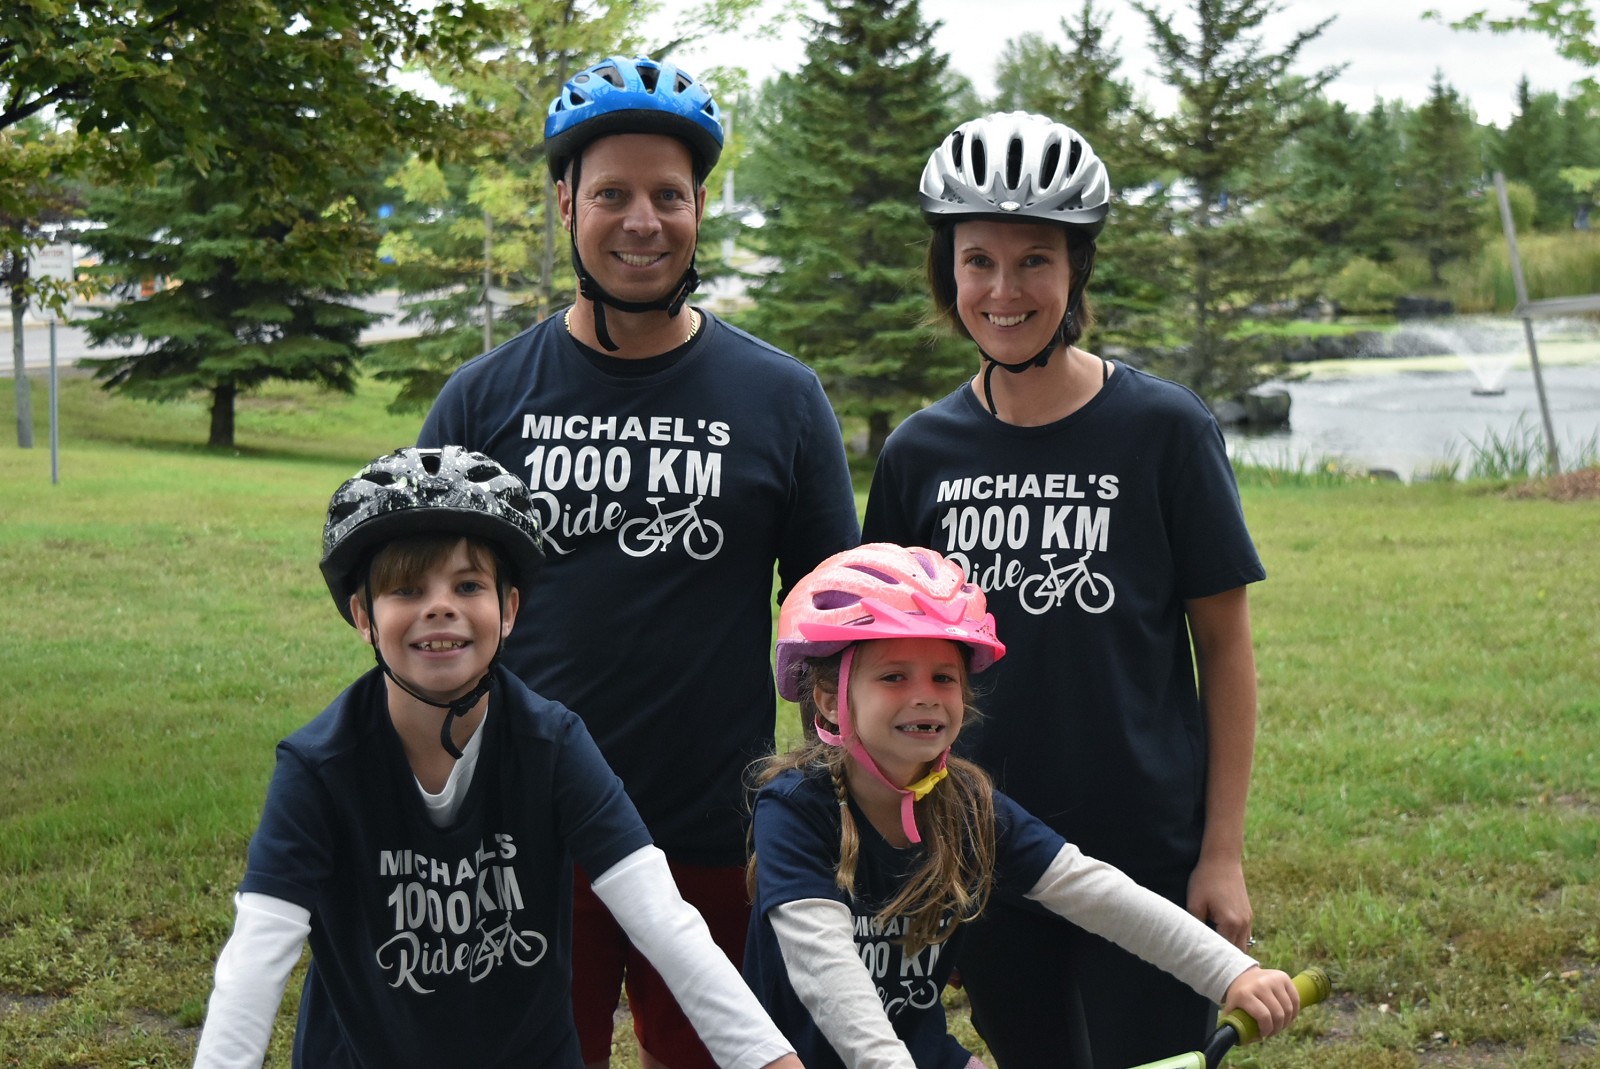 Over 1,000 Km Ridden & $11,575 Raised (and counting) as Michael's 1,000 Km Ride Finishes